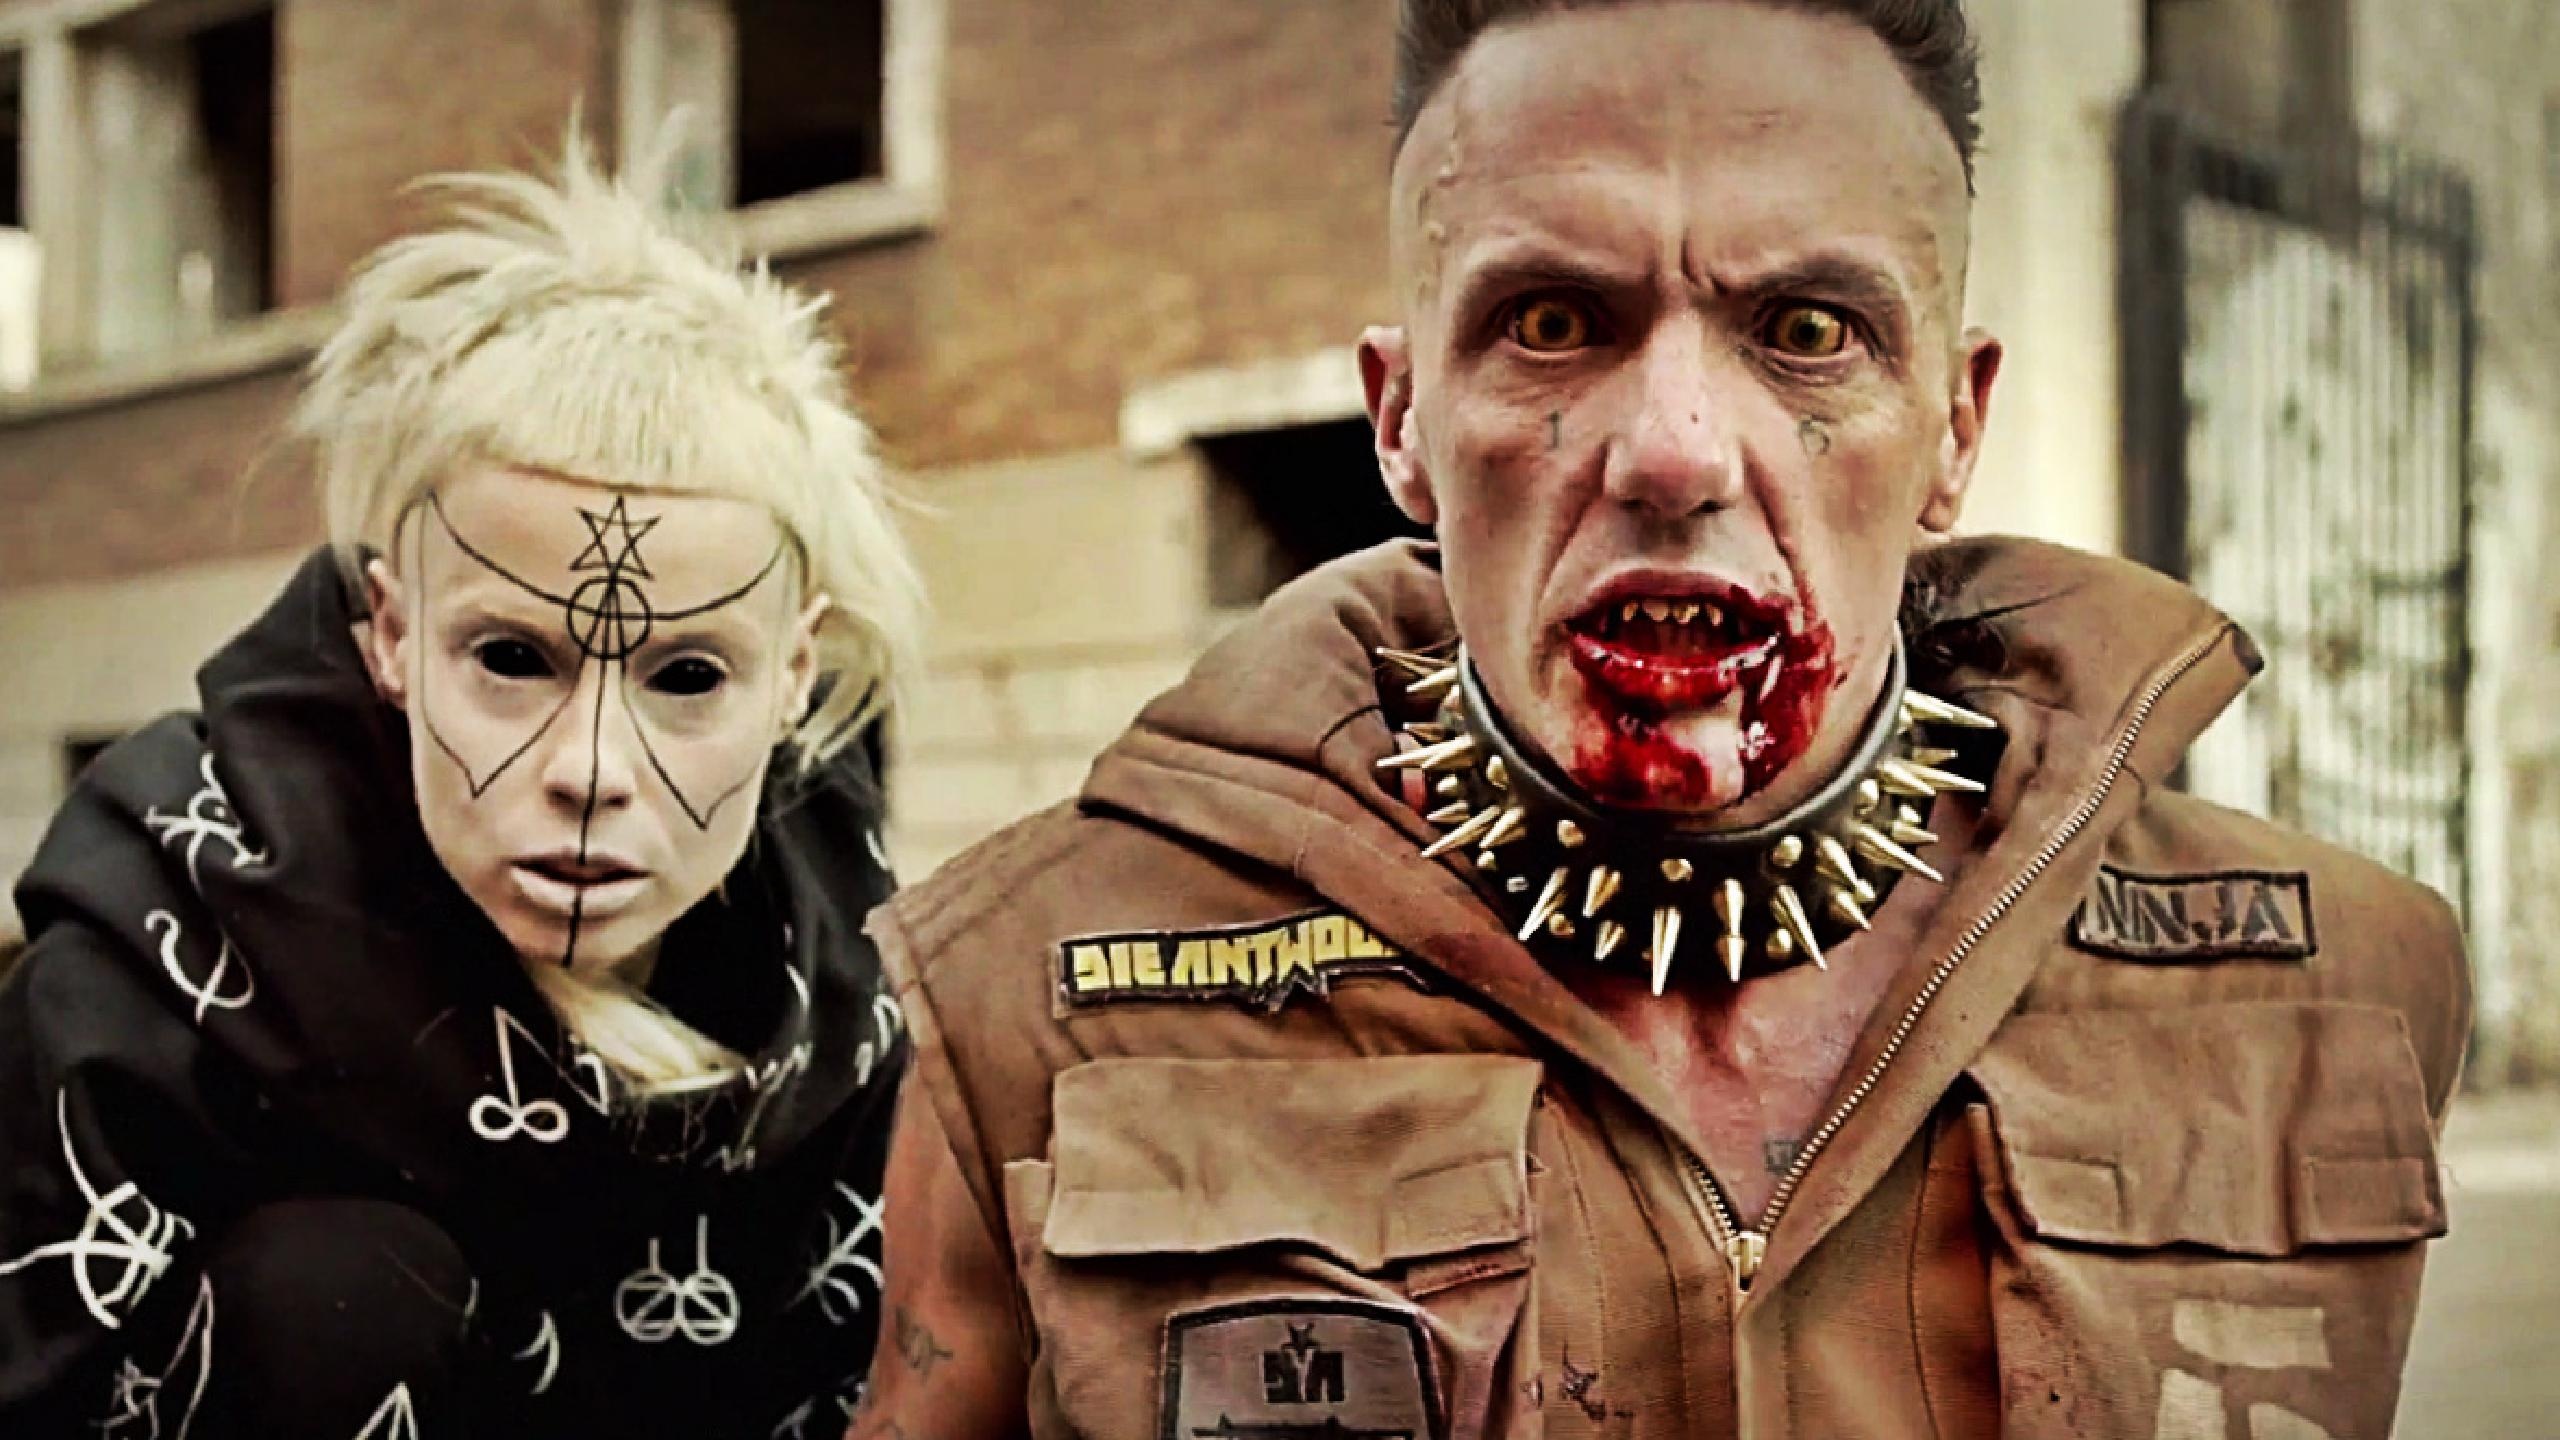 Die Antwoord: Known for their cult following, in particular, the unusually prolific creation of fan art by their followers. 2560x1440 HD Wallpaper.